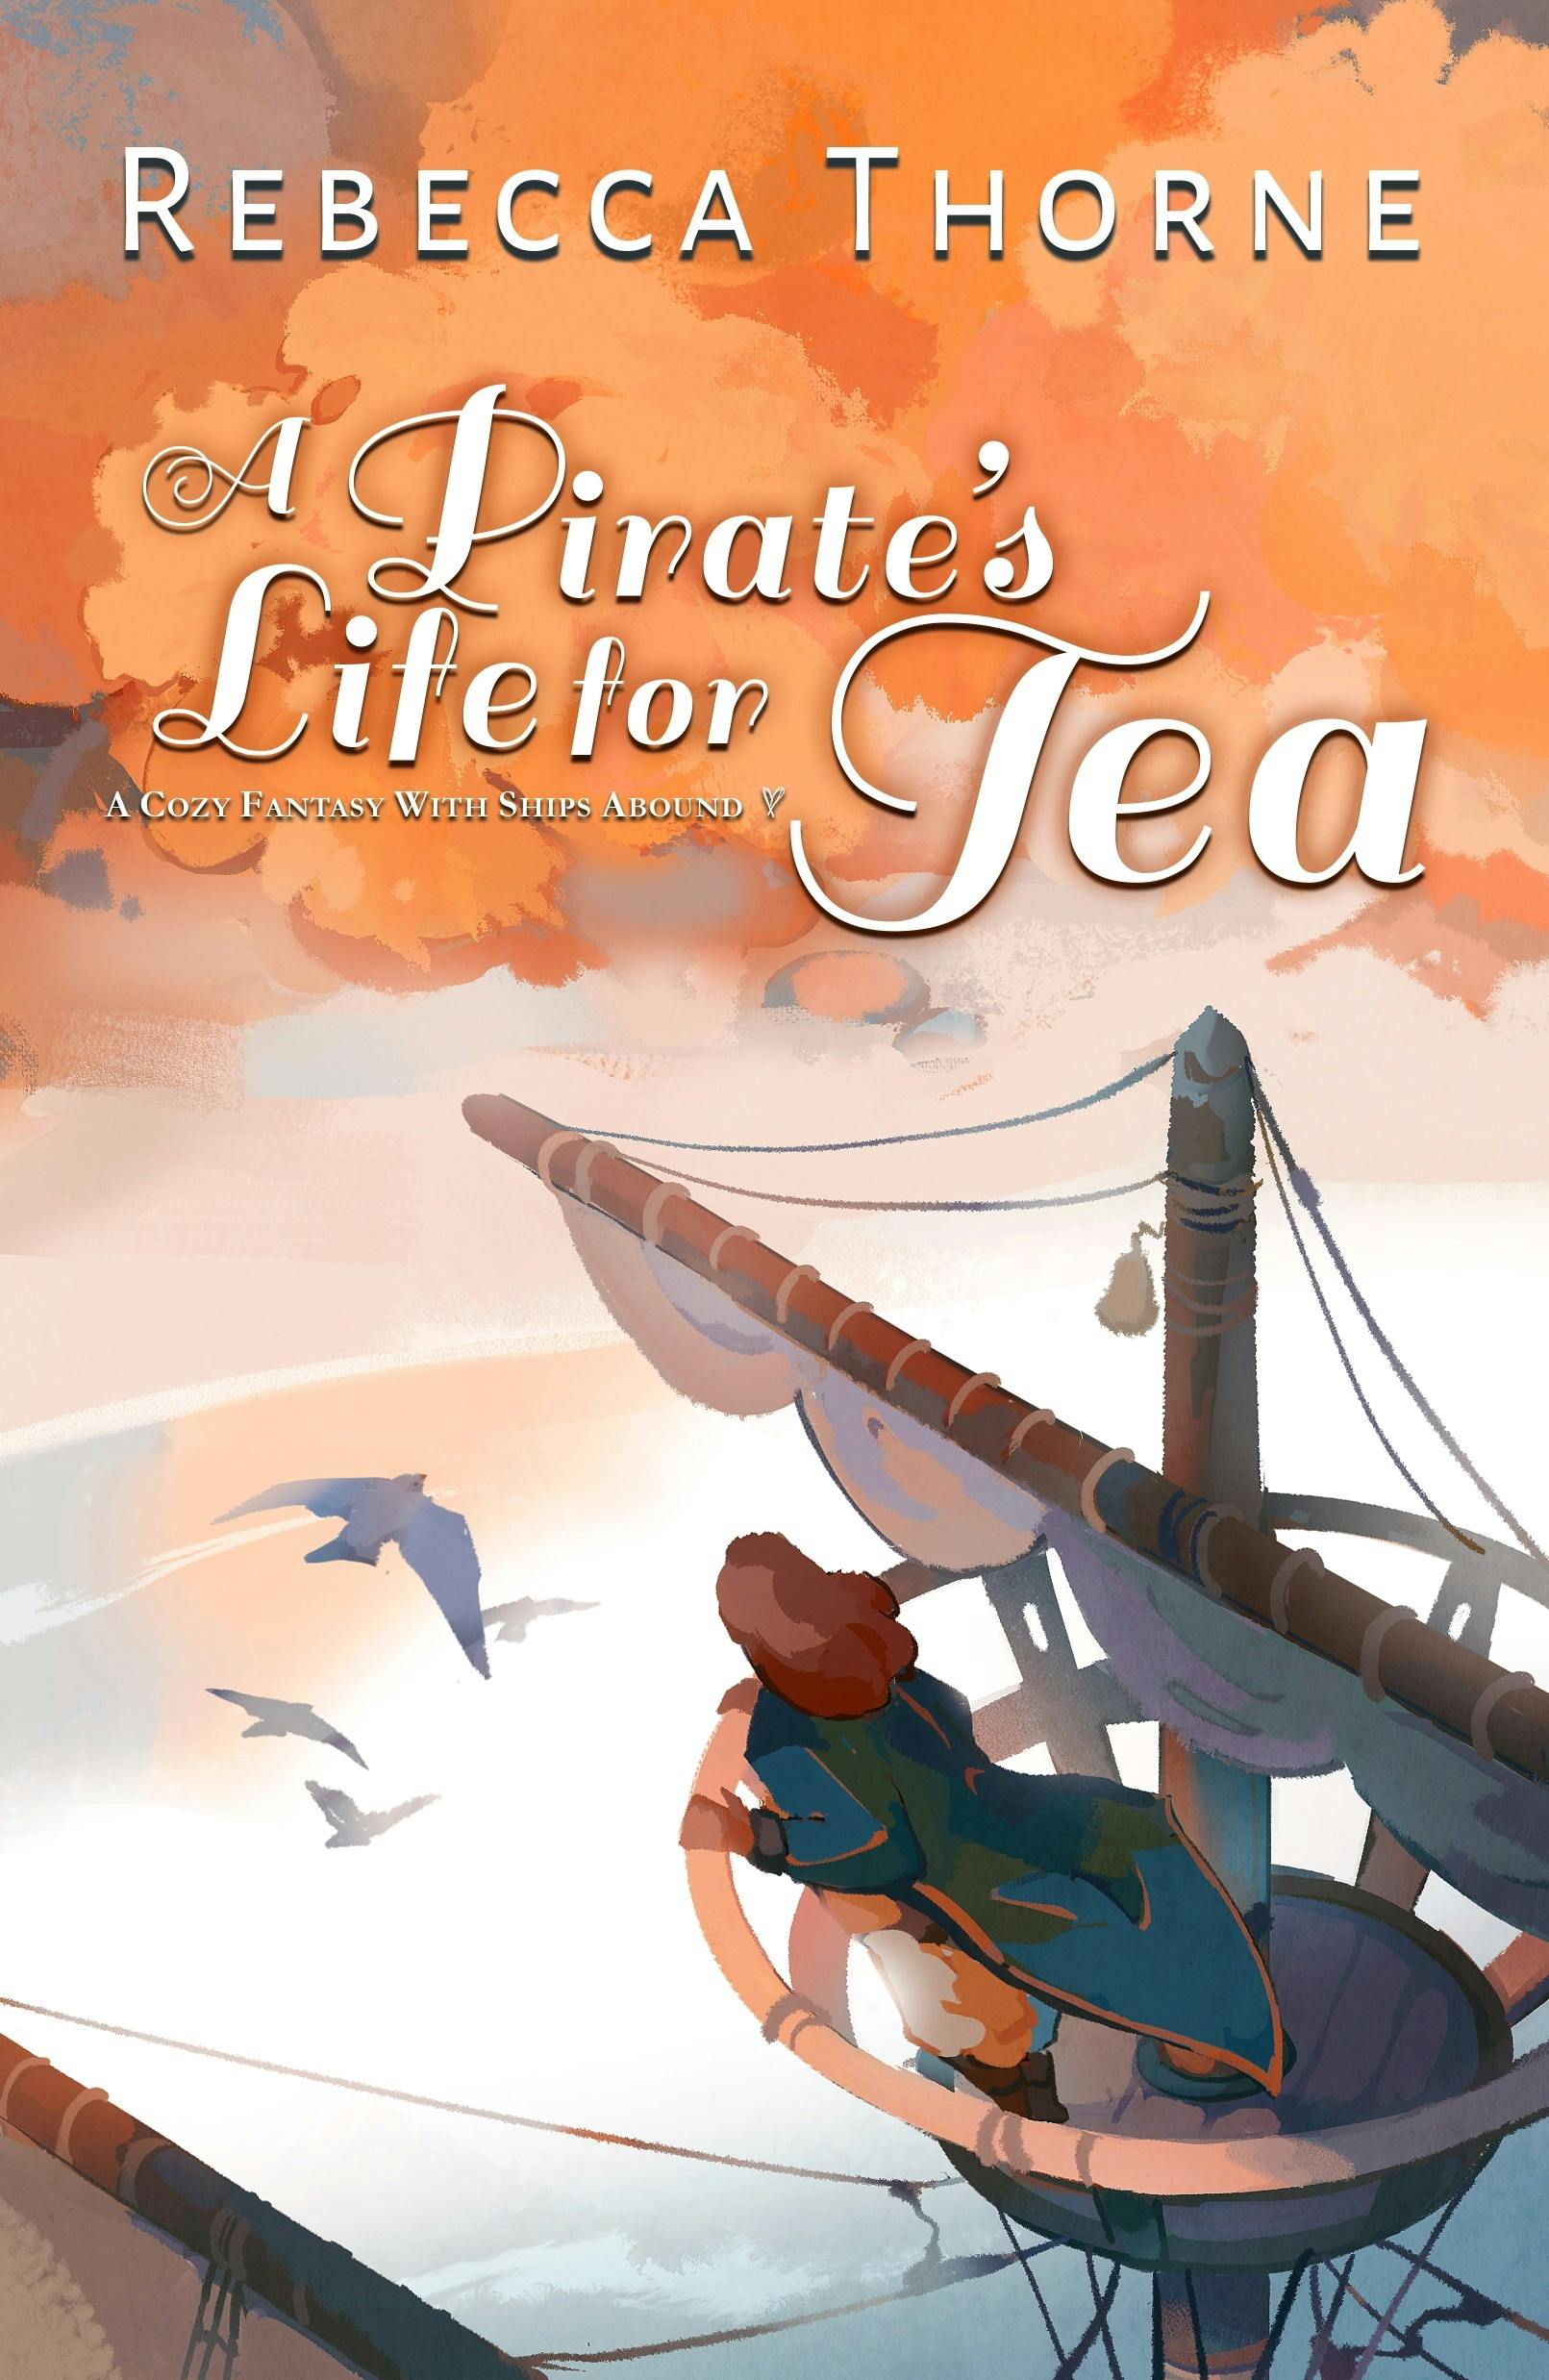 Image of A Pirate's Life for Tea